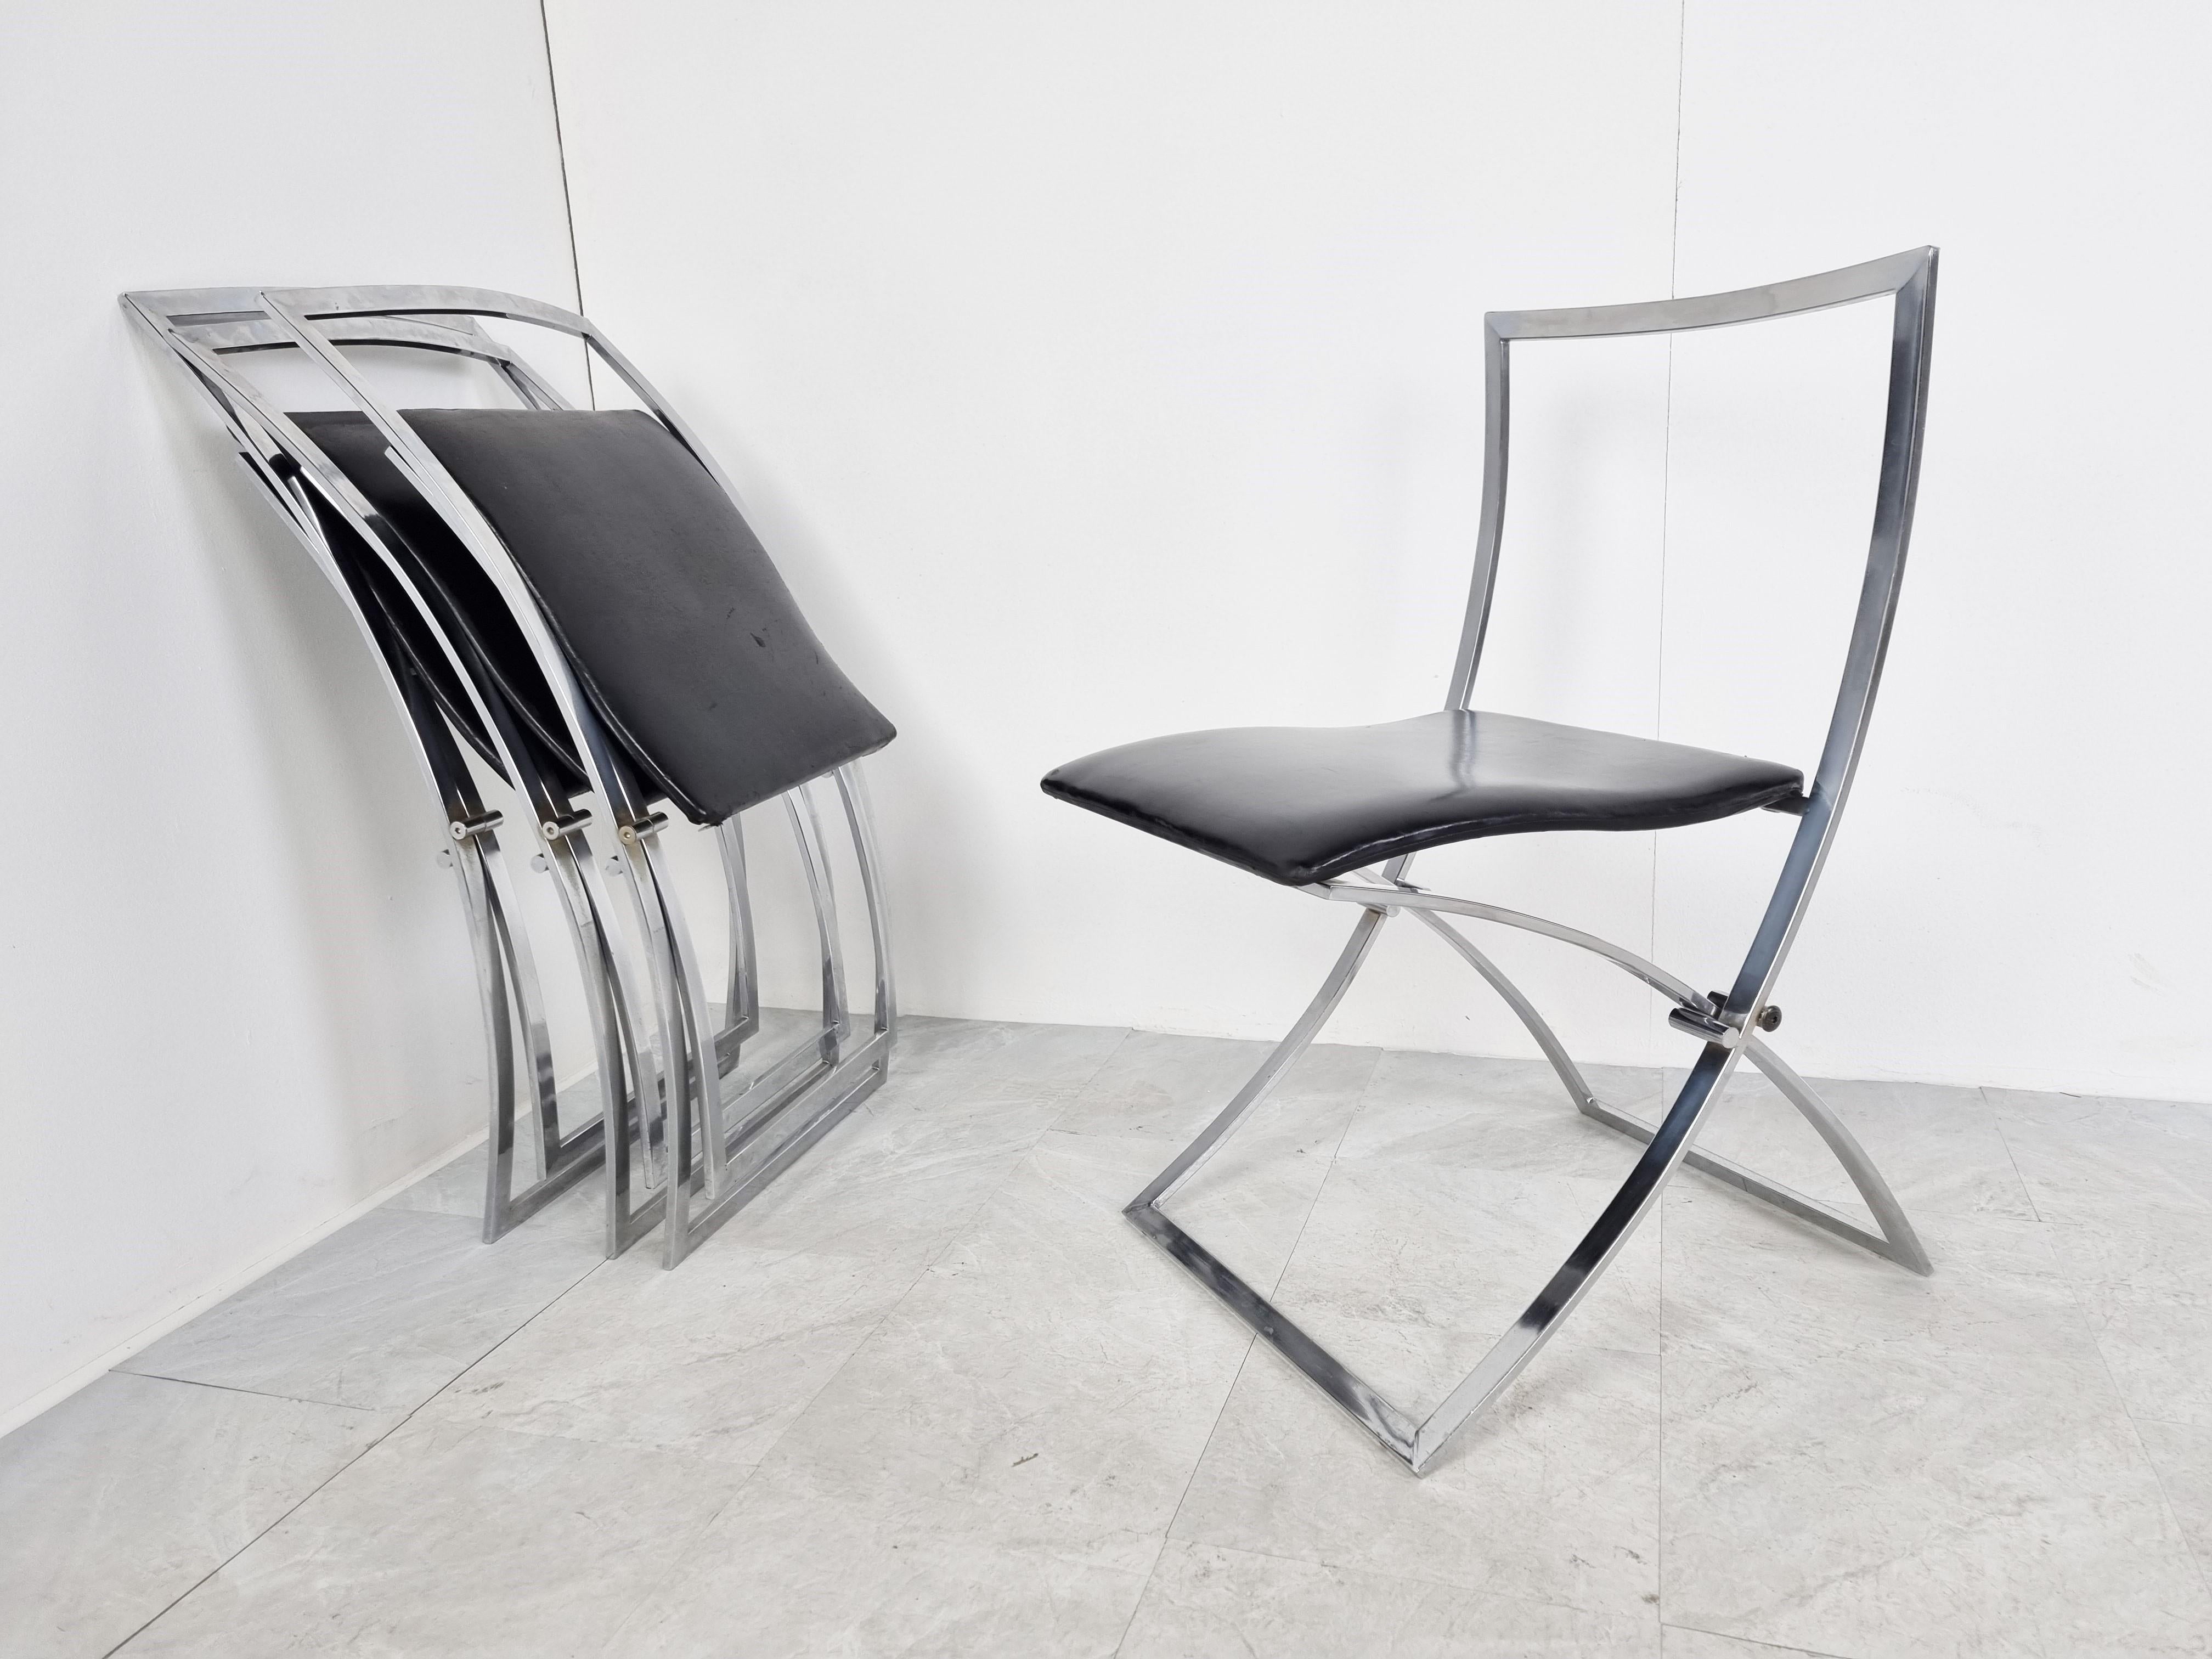 Italian chromed foldable dining chairs designed by Marcello Cuneo for Mobel. Model Luisa

These elegant chairs have a timeless design and are upholstered with their original black leather seats.

Good original condition with normal age related